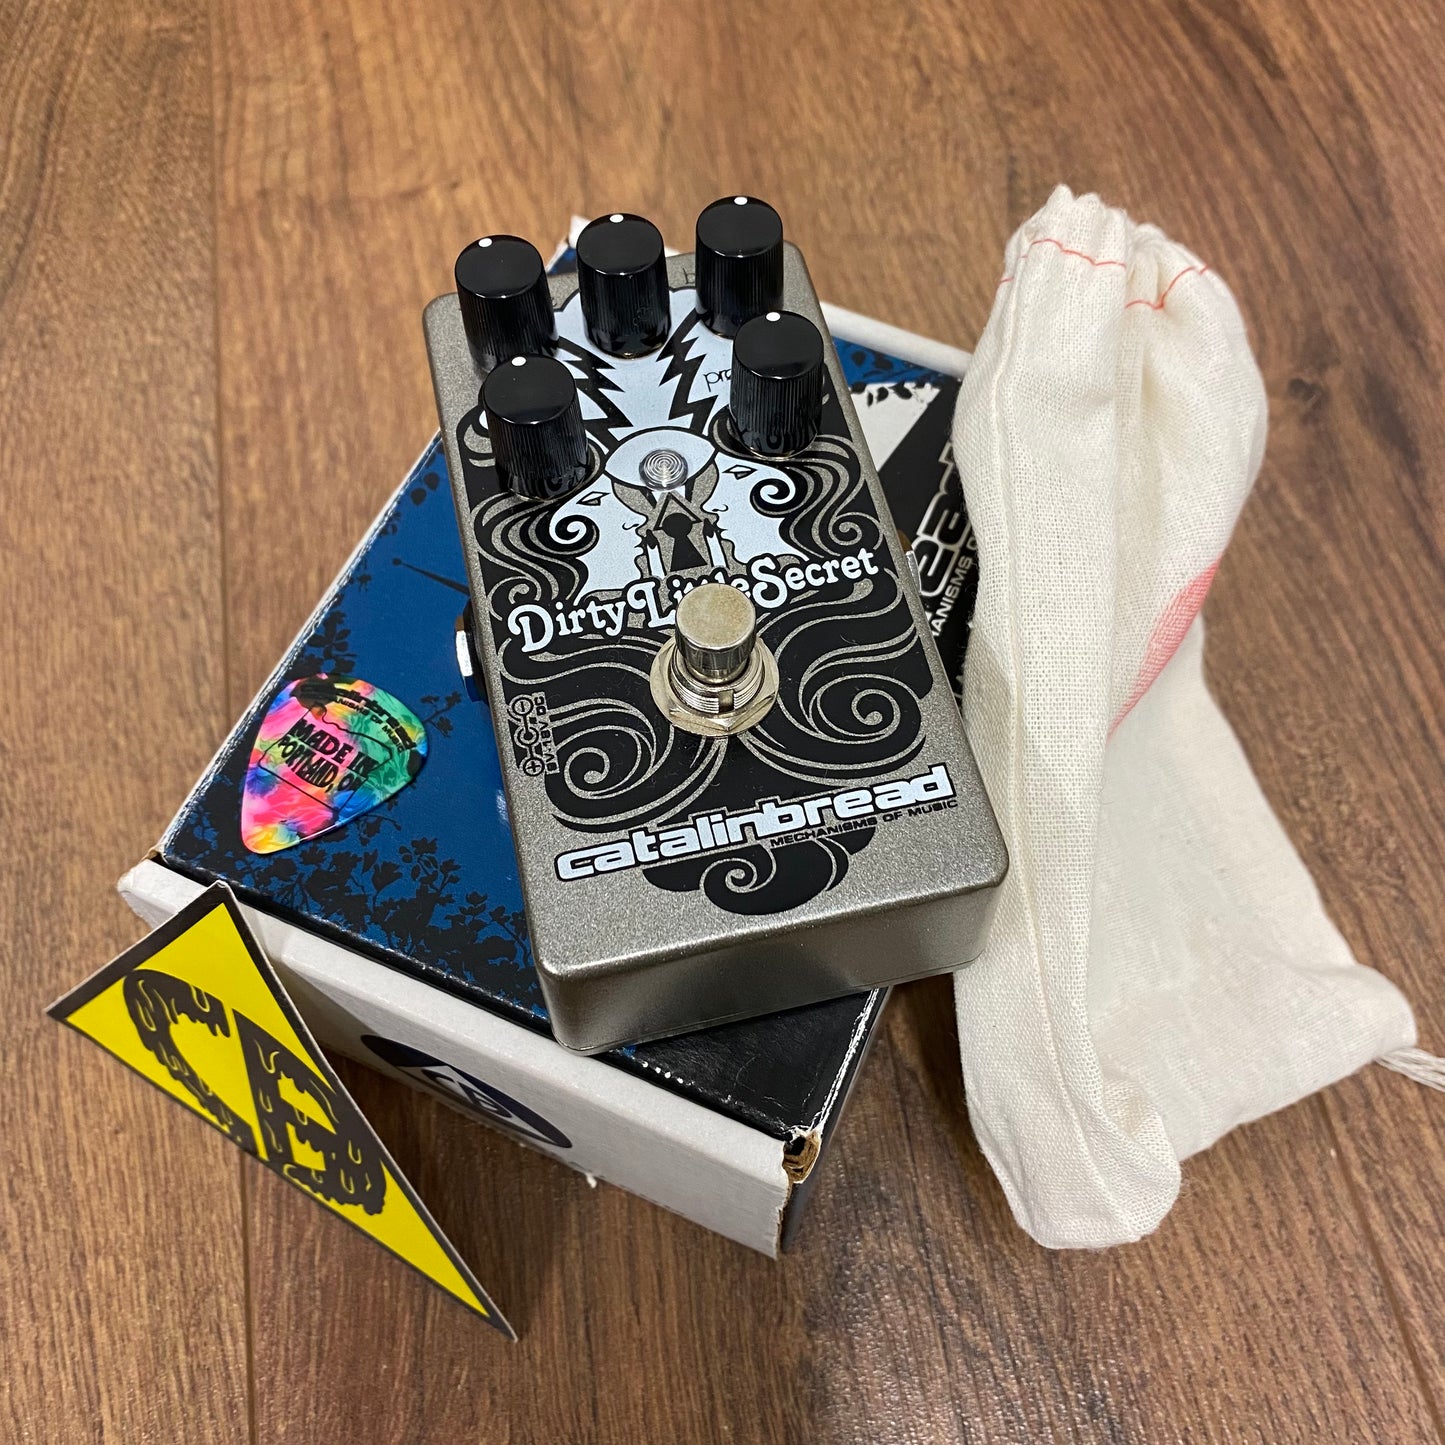 Pre-Owned Catalinbread Dirty Little Secret Drive Pedal